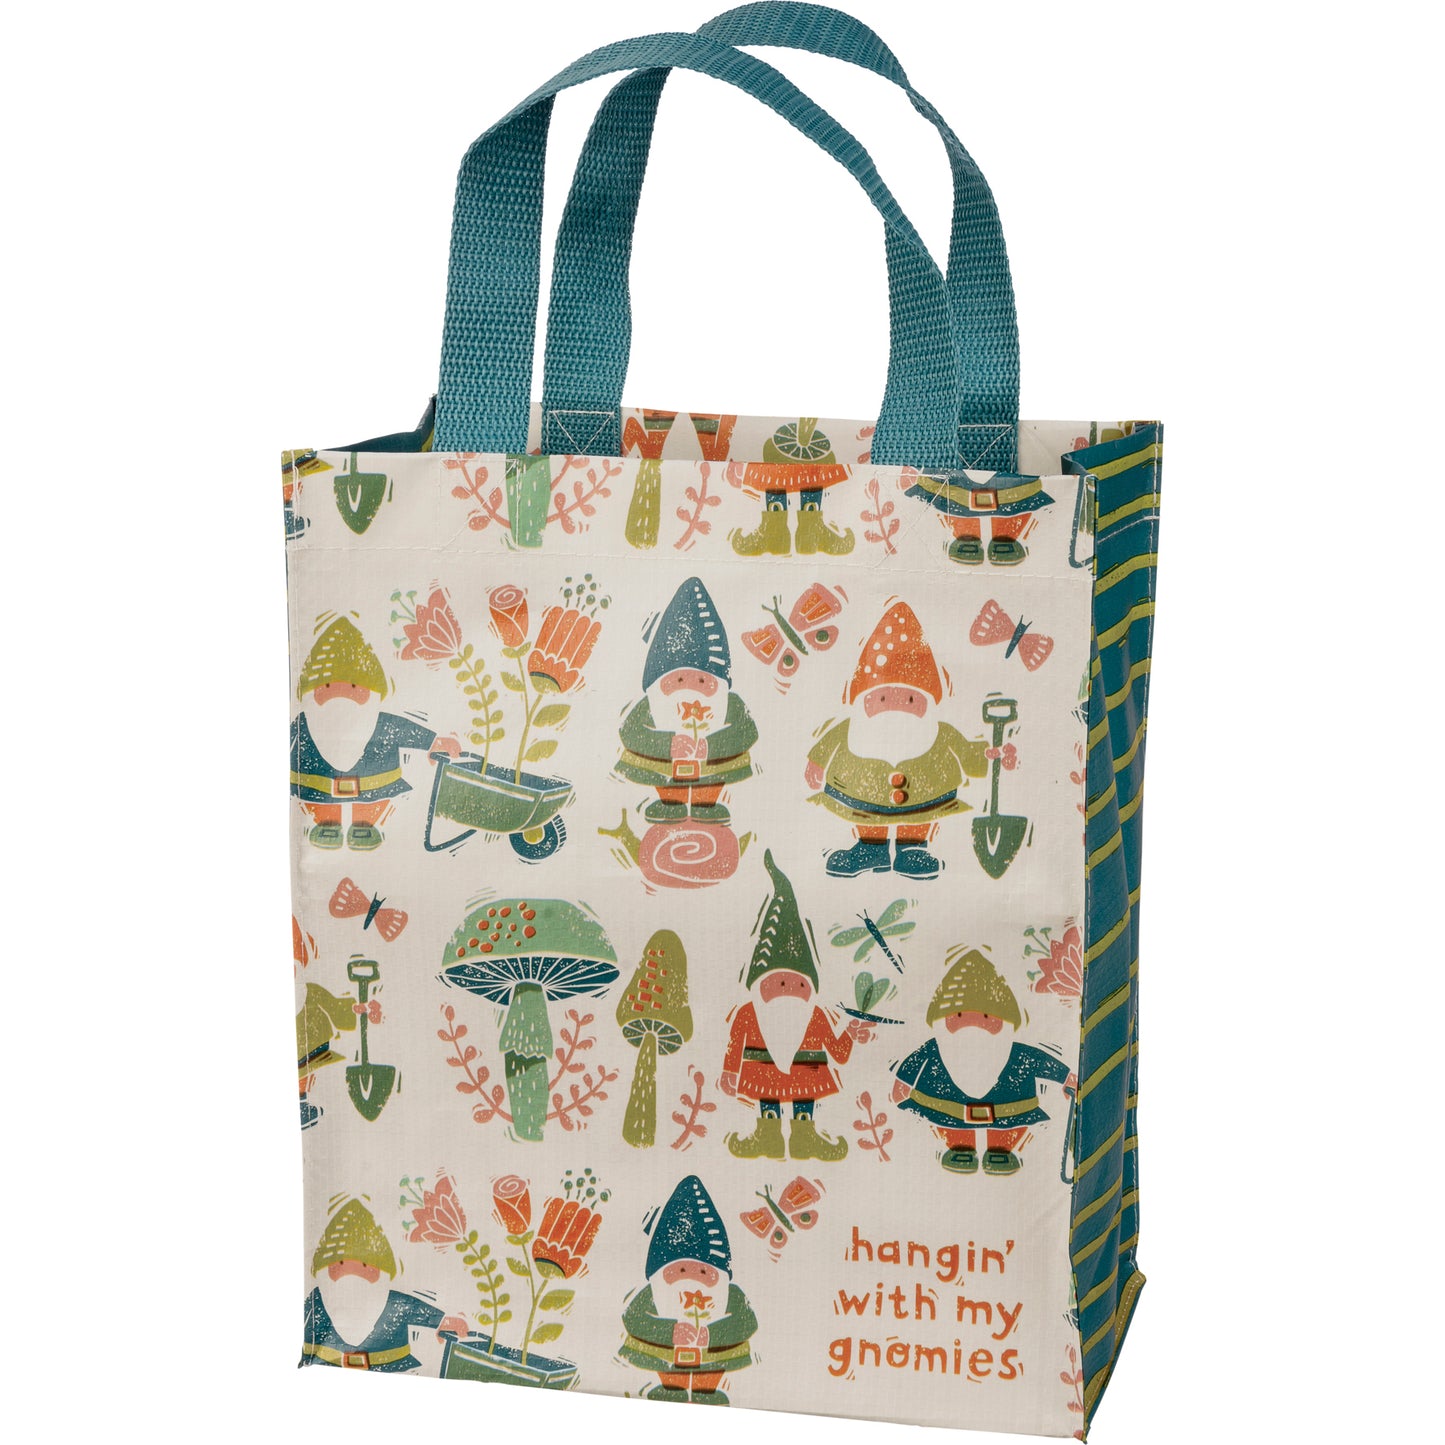 Daily Tote - "Hangin' With My Gnomies"